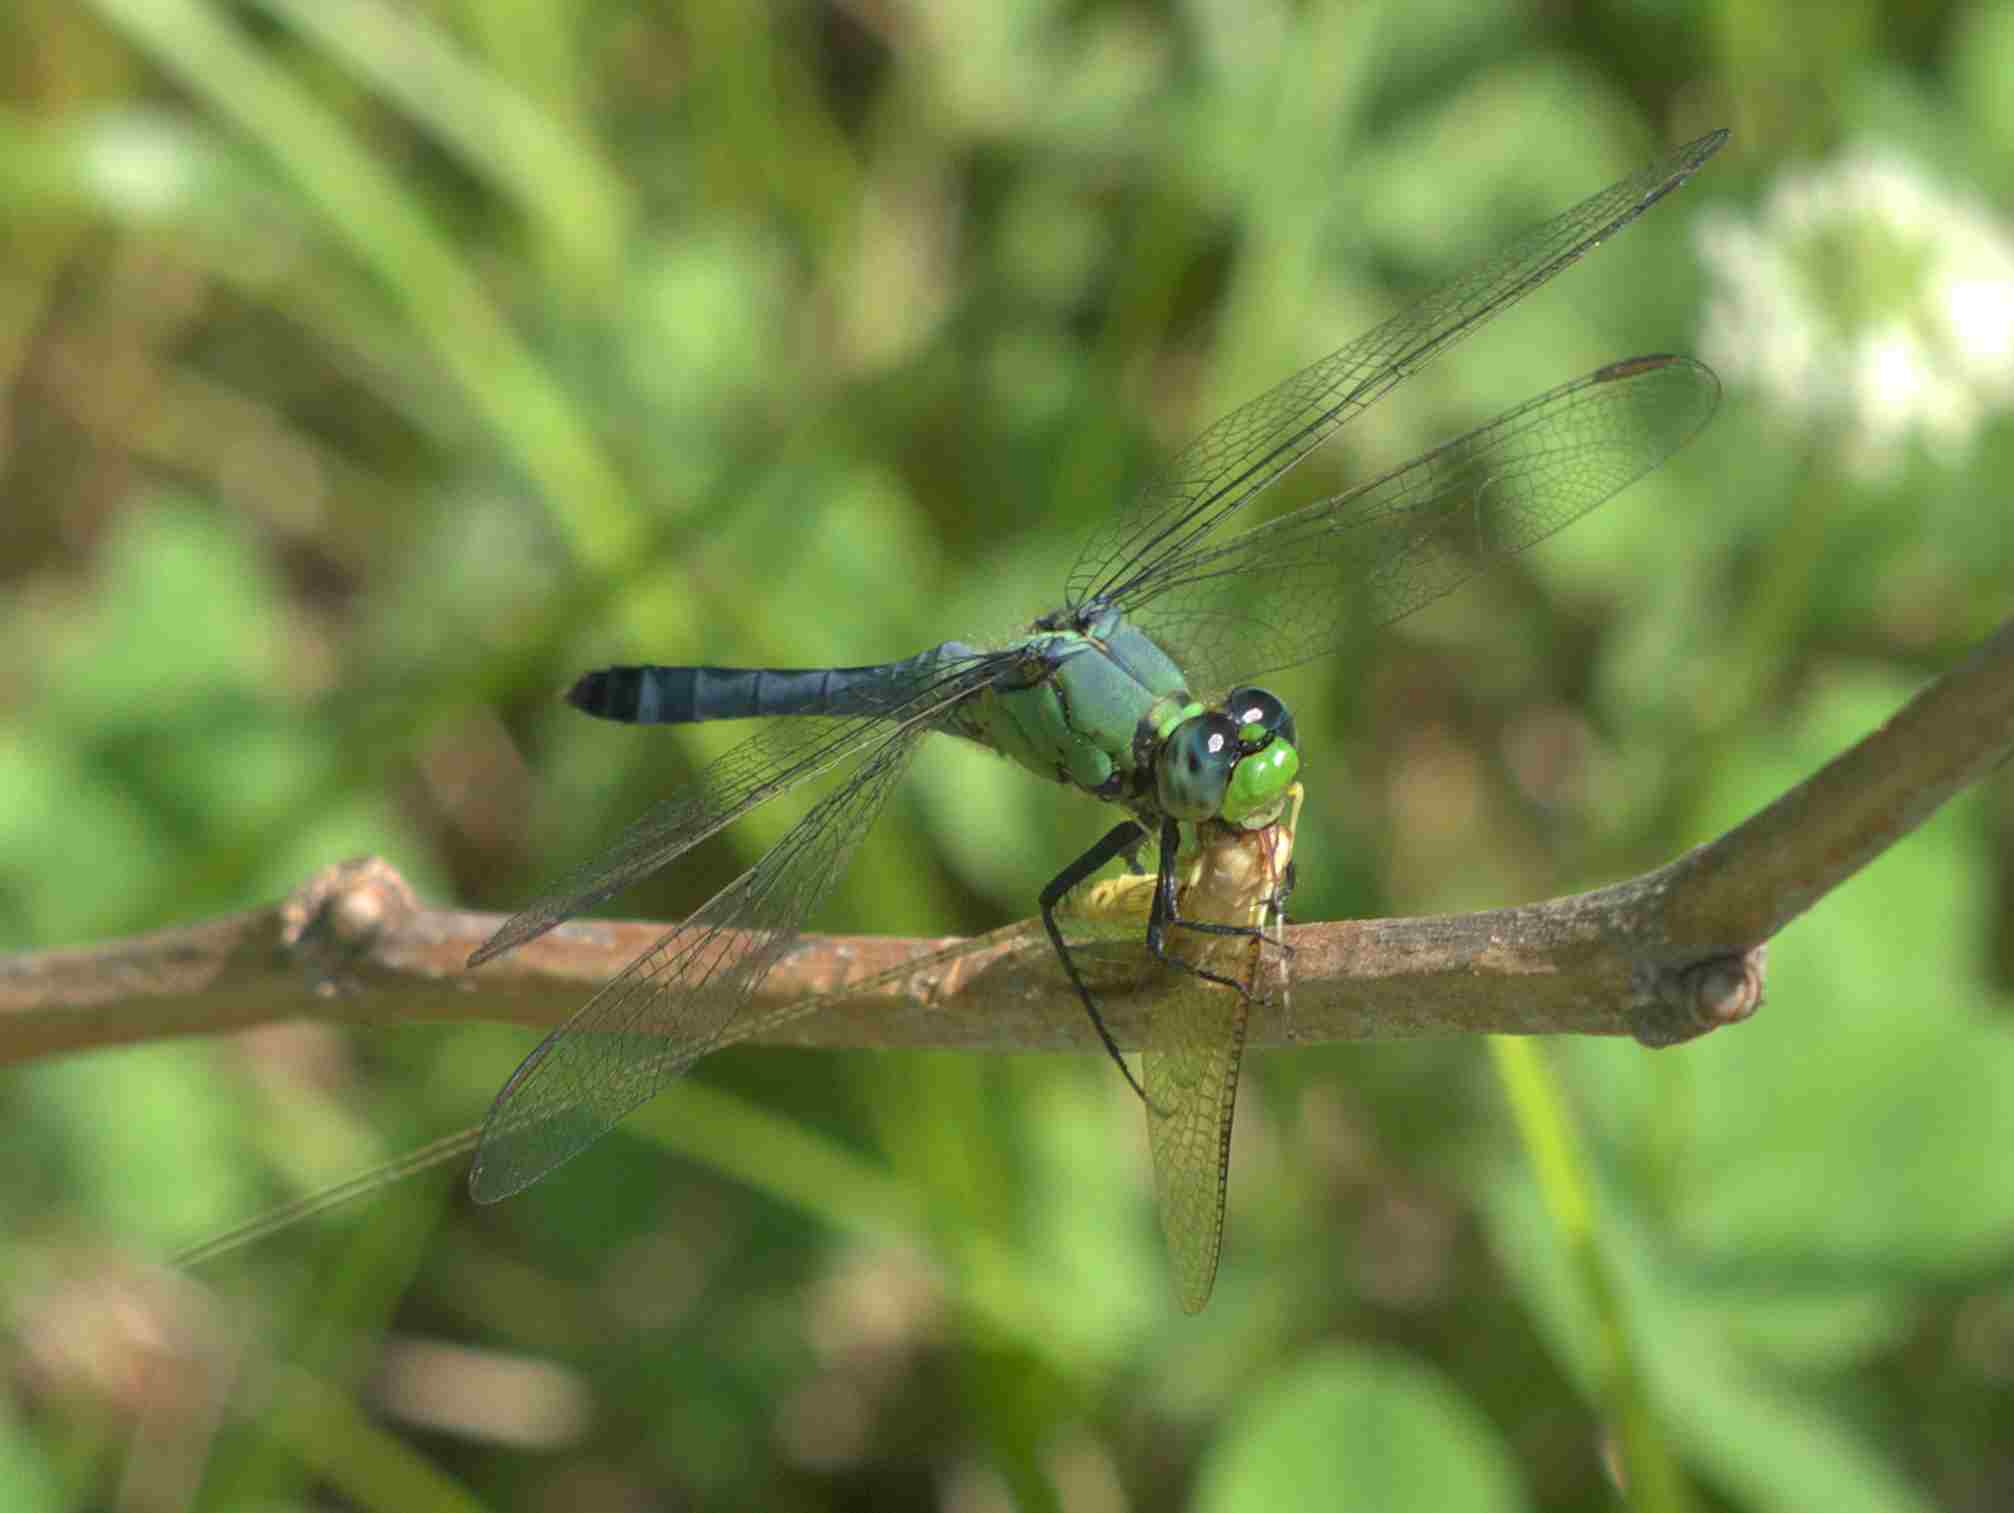 Is a Dragonfly a Consumer: Relative Size and Carnivorous Feeding Help Categorize Dragonflies as Secondary Consumers (Credit: Bob Webster 2011 .CC BY 2.0.)